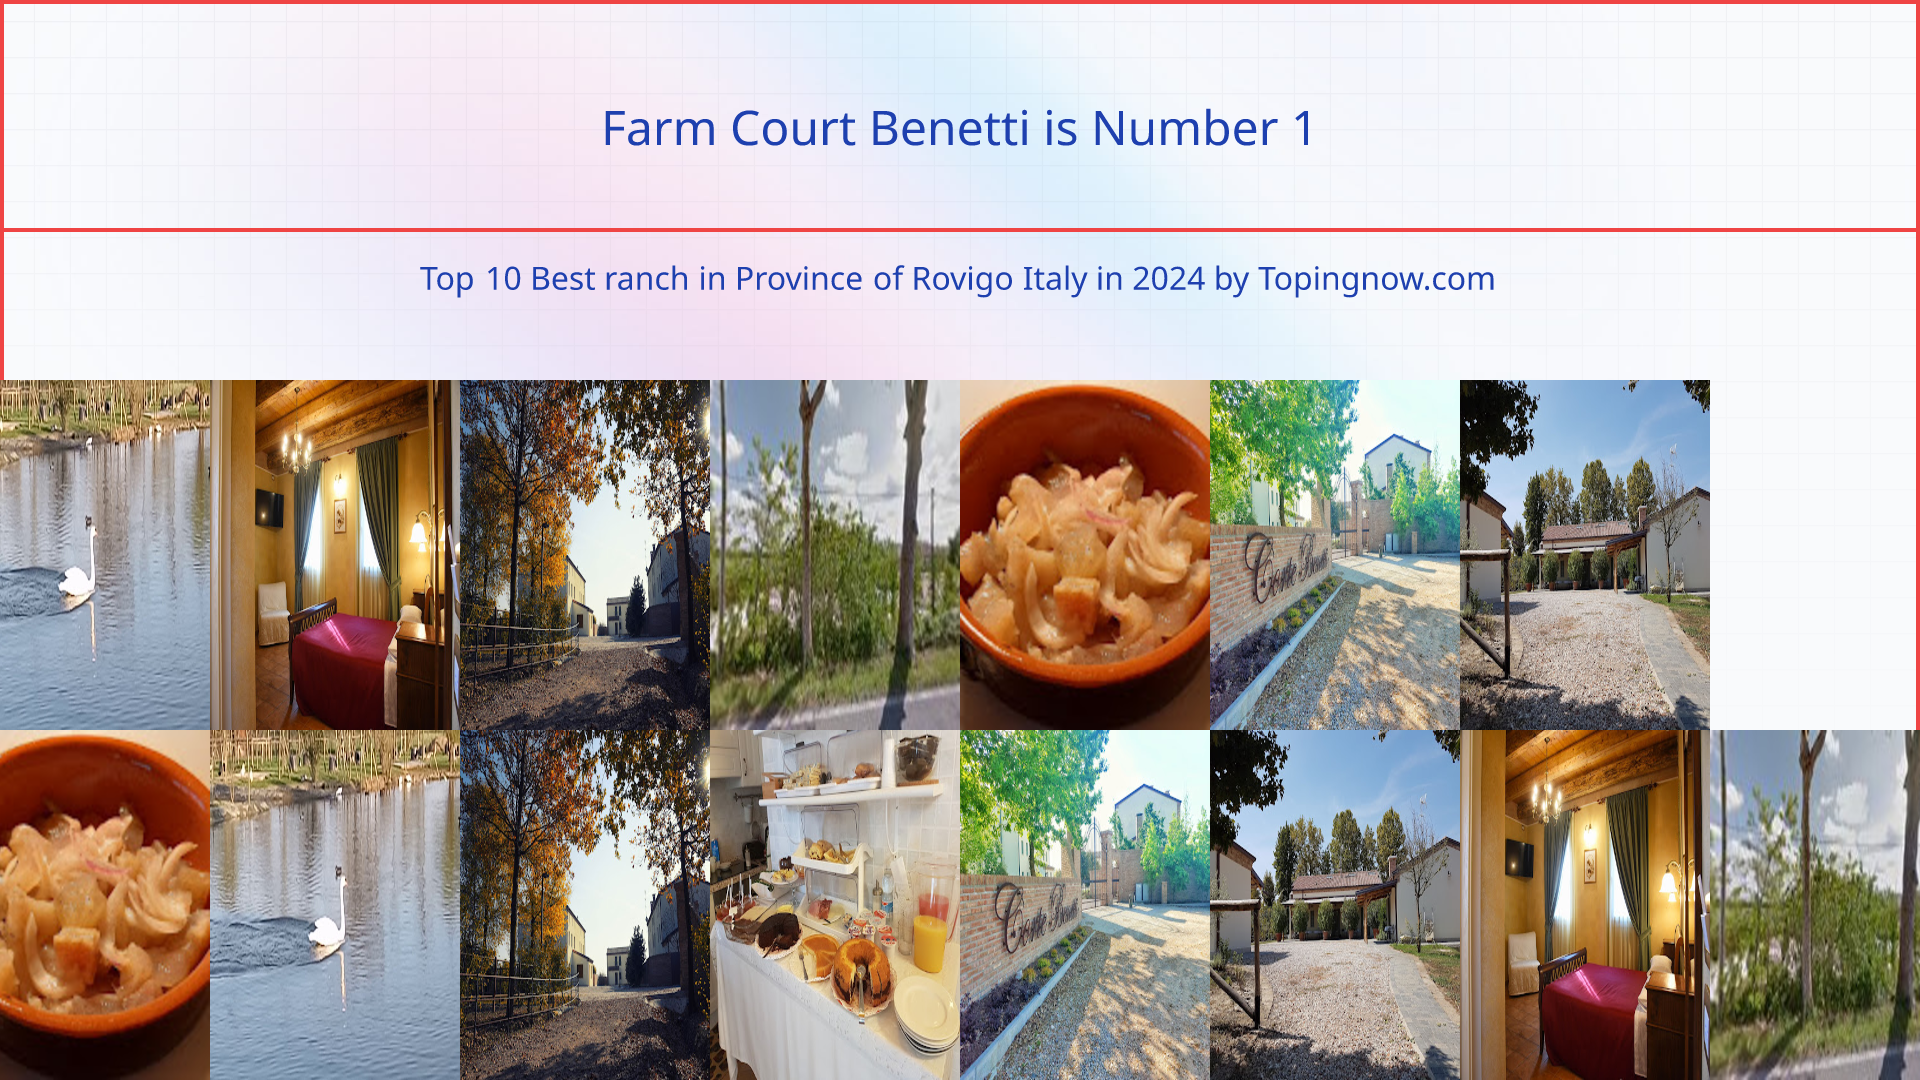 Farm Court Benetti: Top 10 Best ranch in Province of Rovigo Italy in 2024